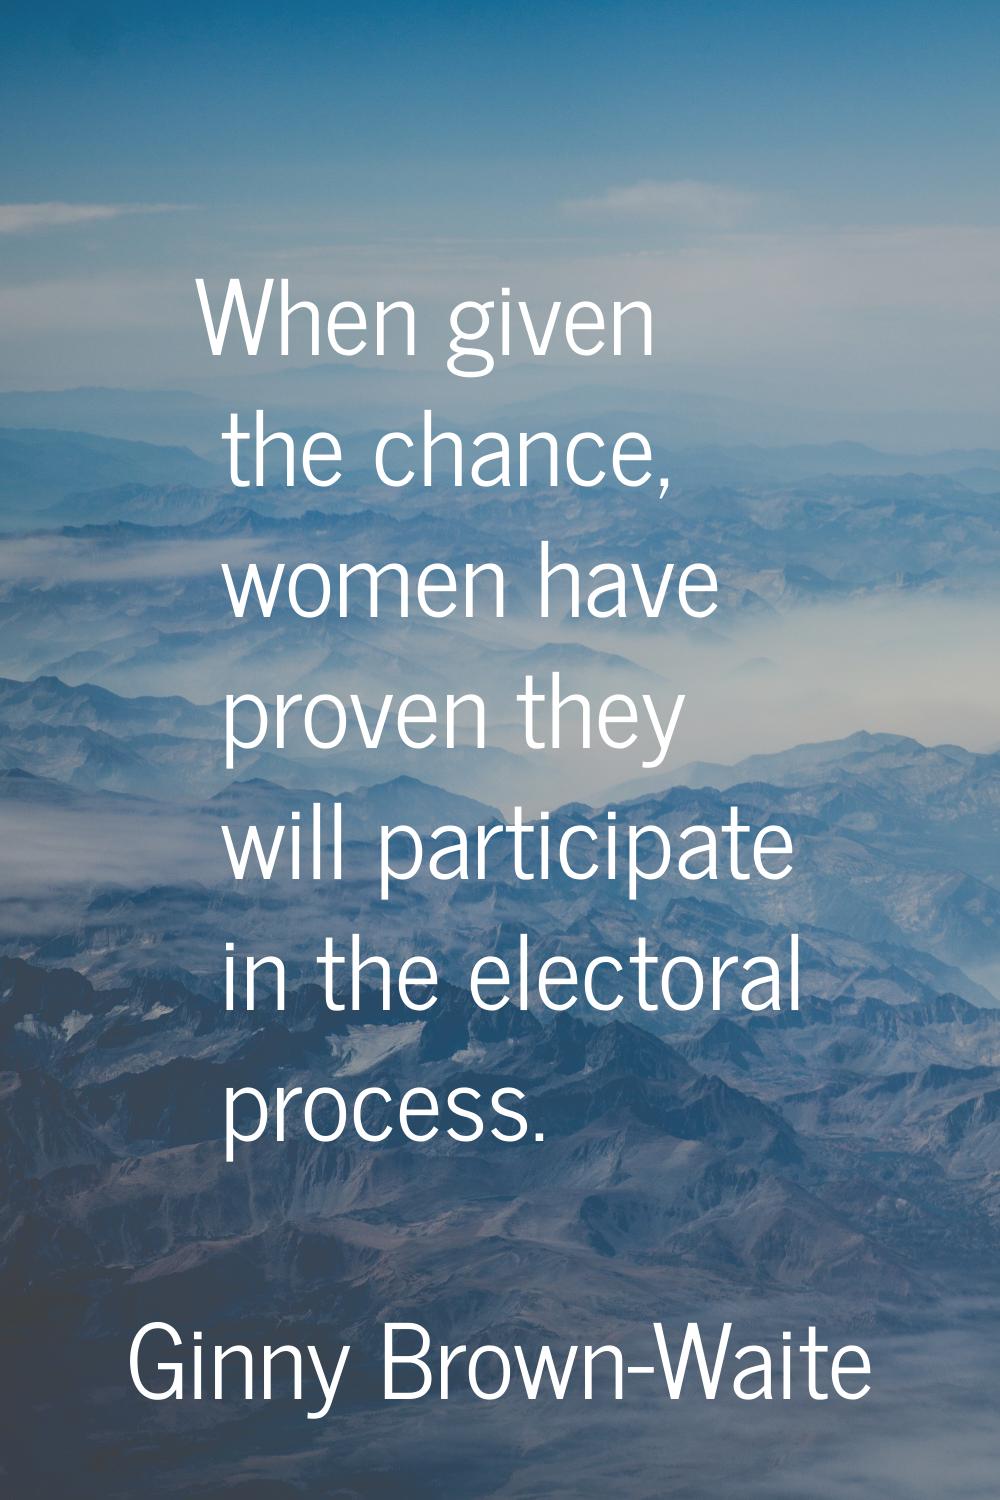 When given the chance, women have proven they will participate in the electoral process.